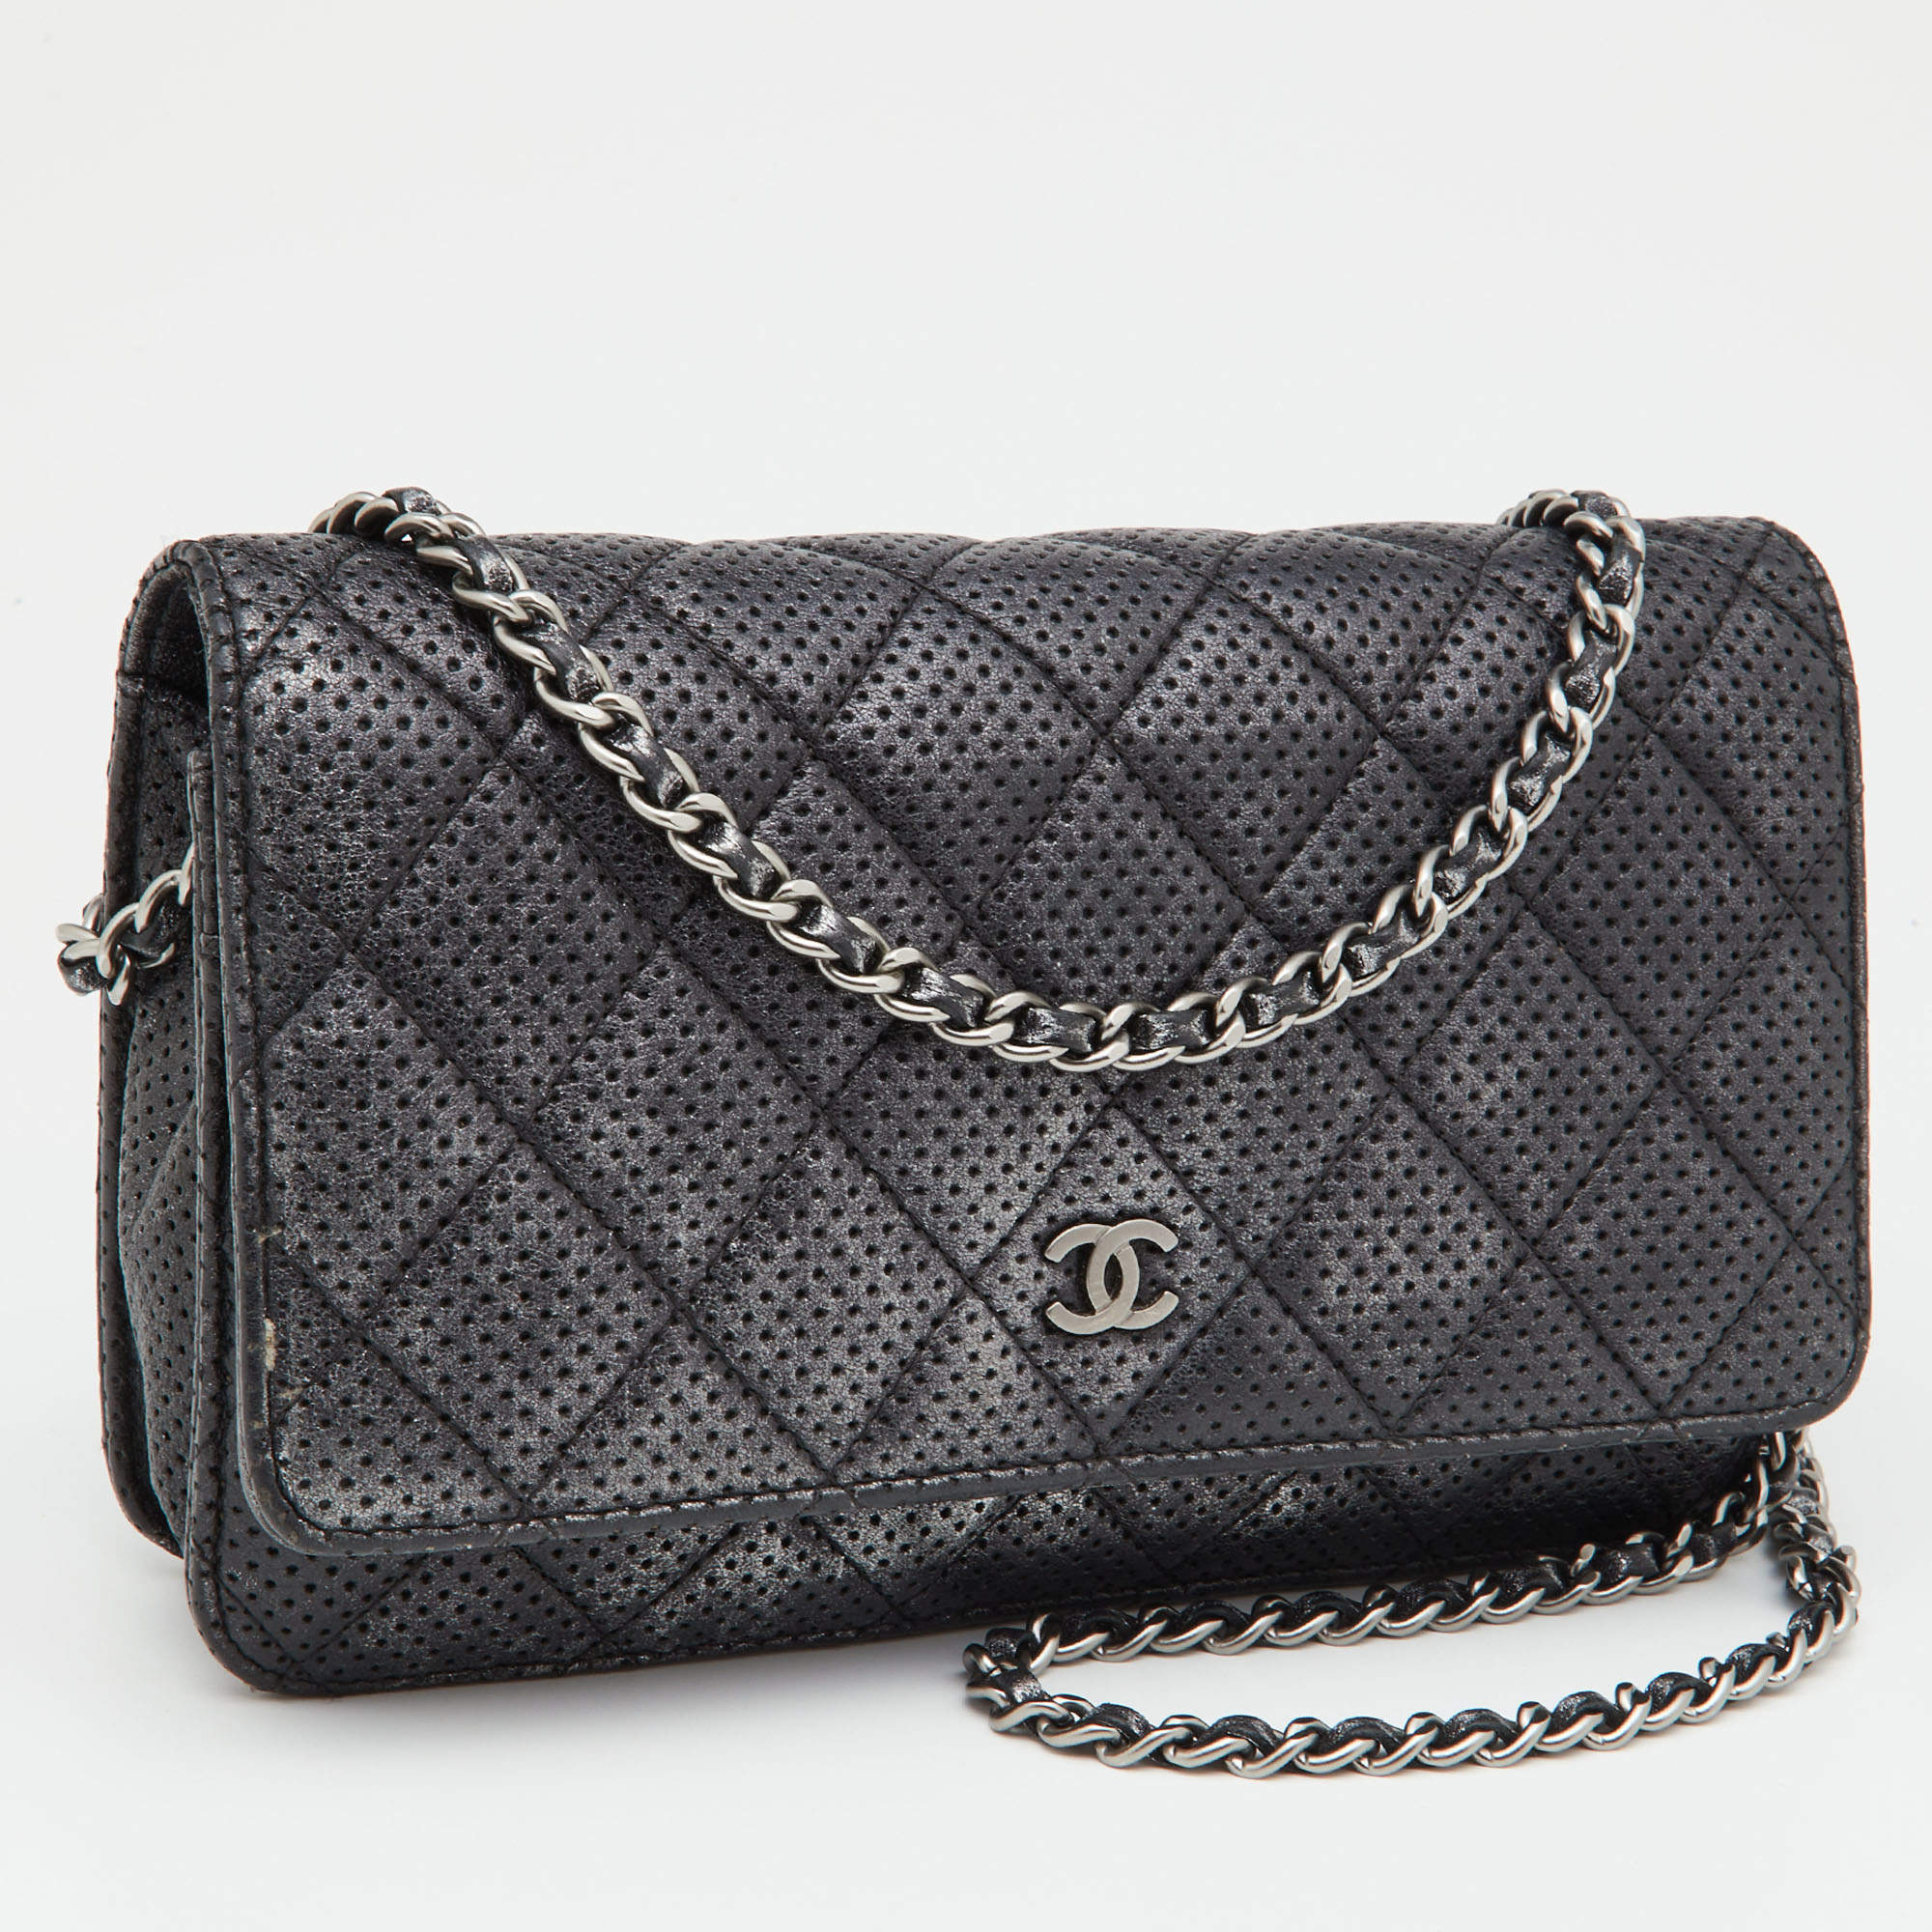 Chanel Black/Silver Quilted Perforated Leather Classic Wallet on Chain